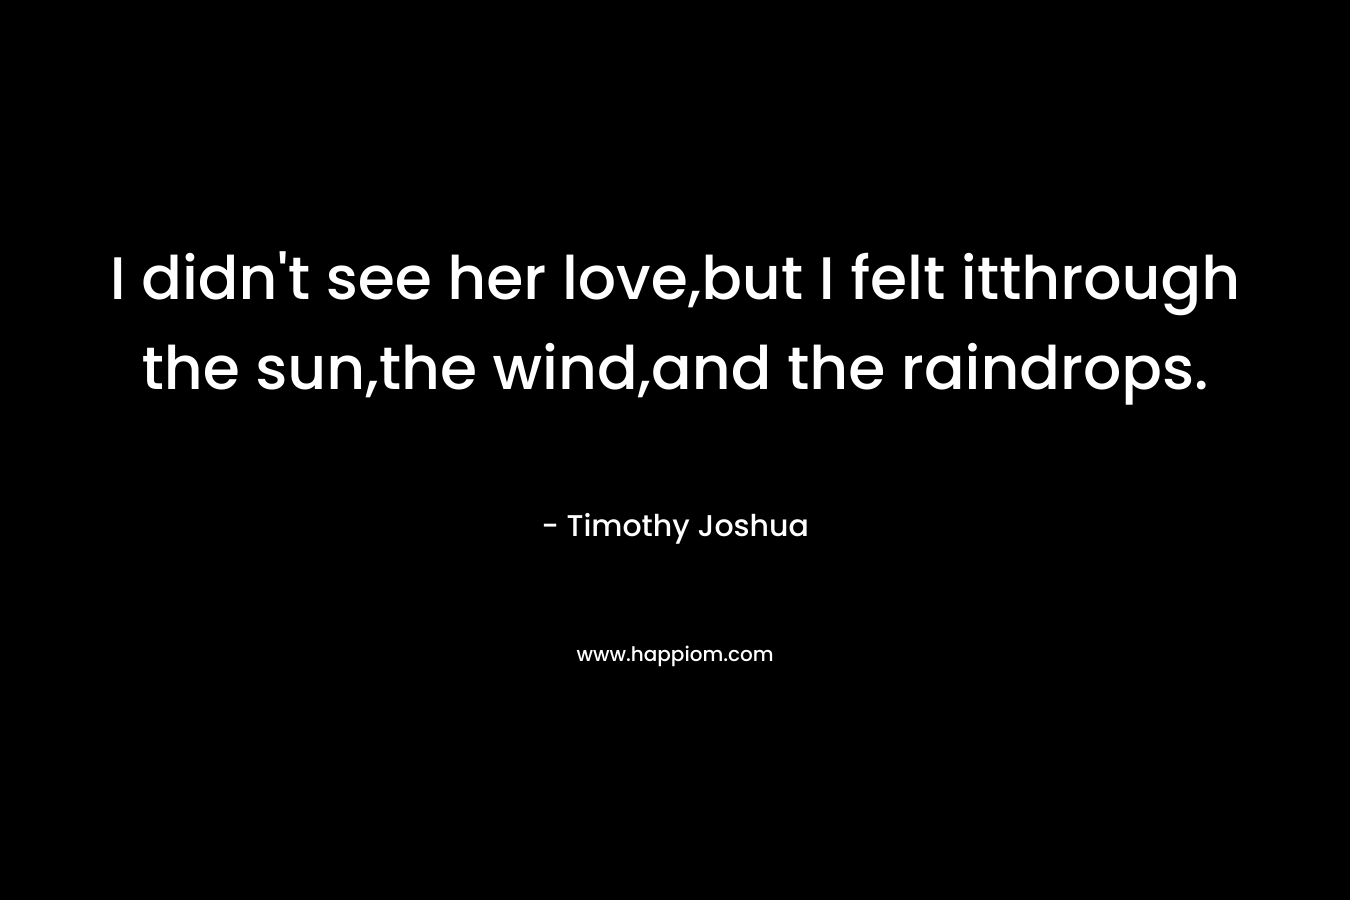 I didn't see her love,but I felt itthrough the sun,the wind,and the raindrops.